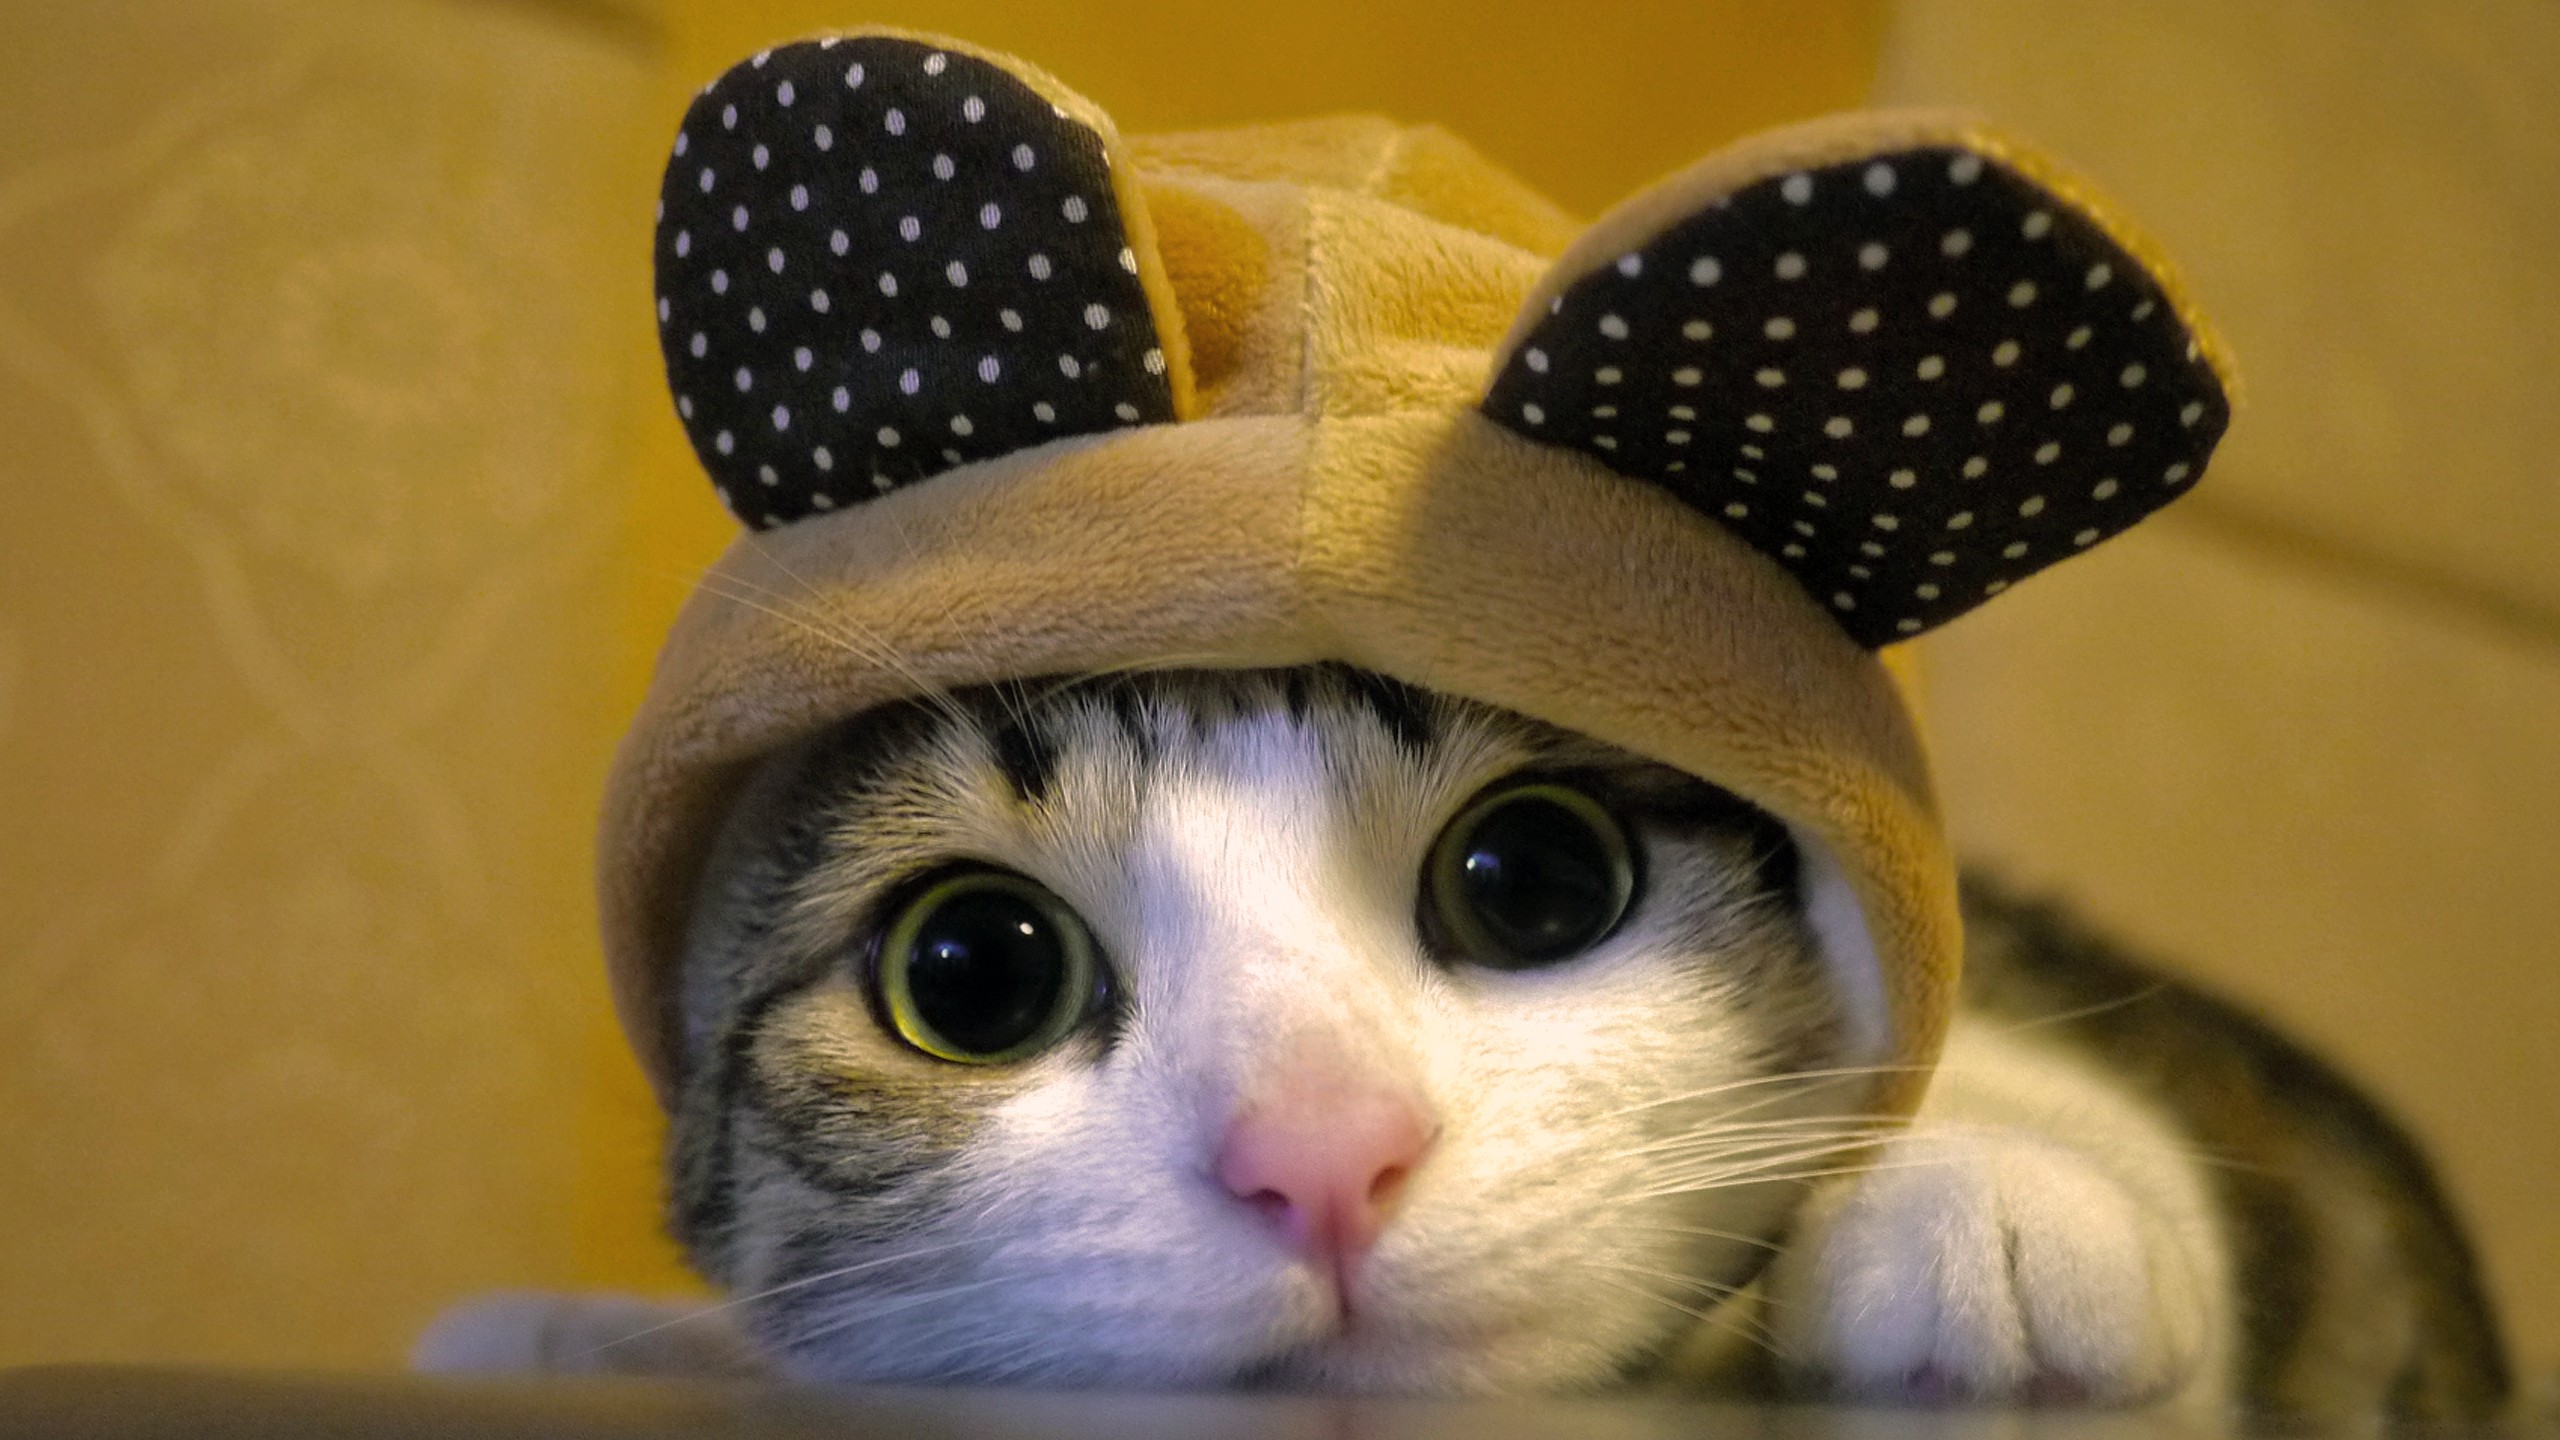 Cute cat pictures and cat wallpapers because cats are cool